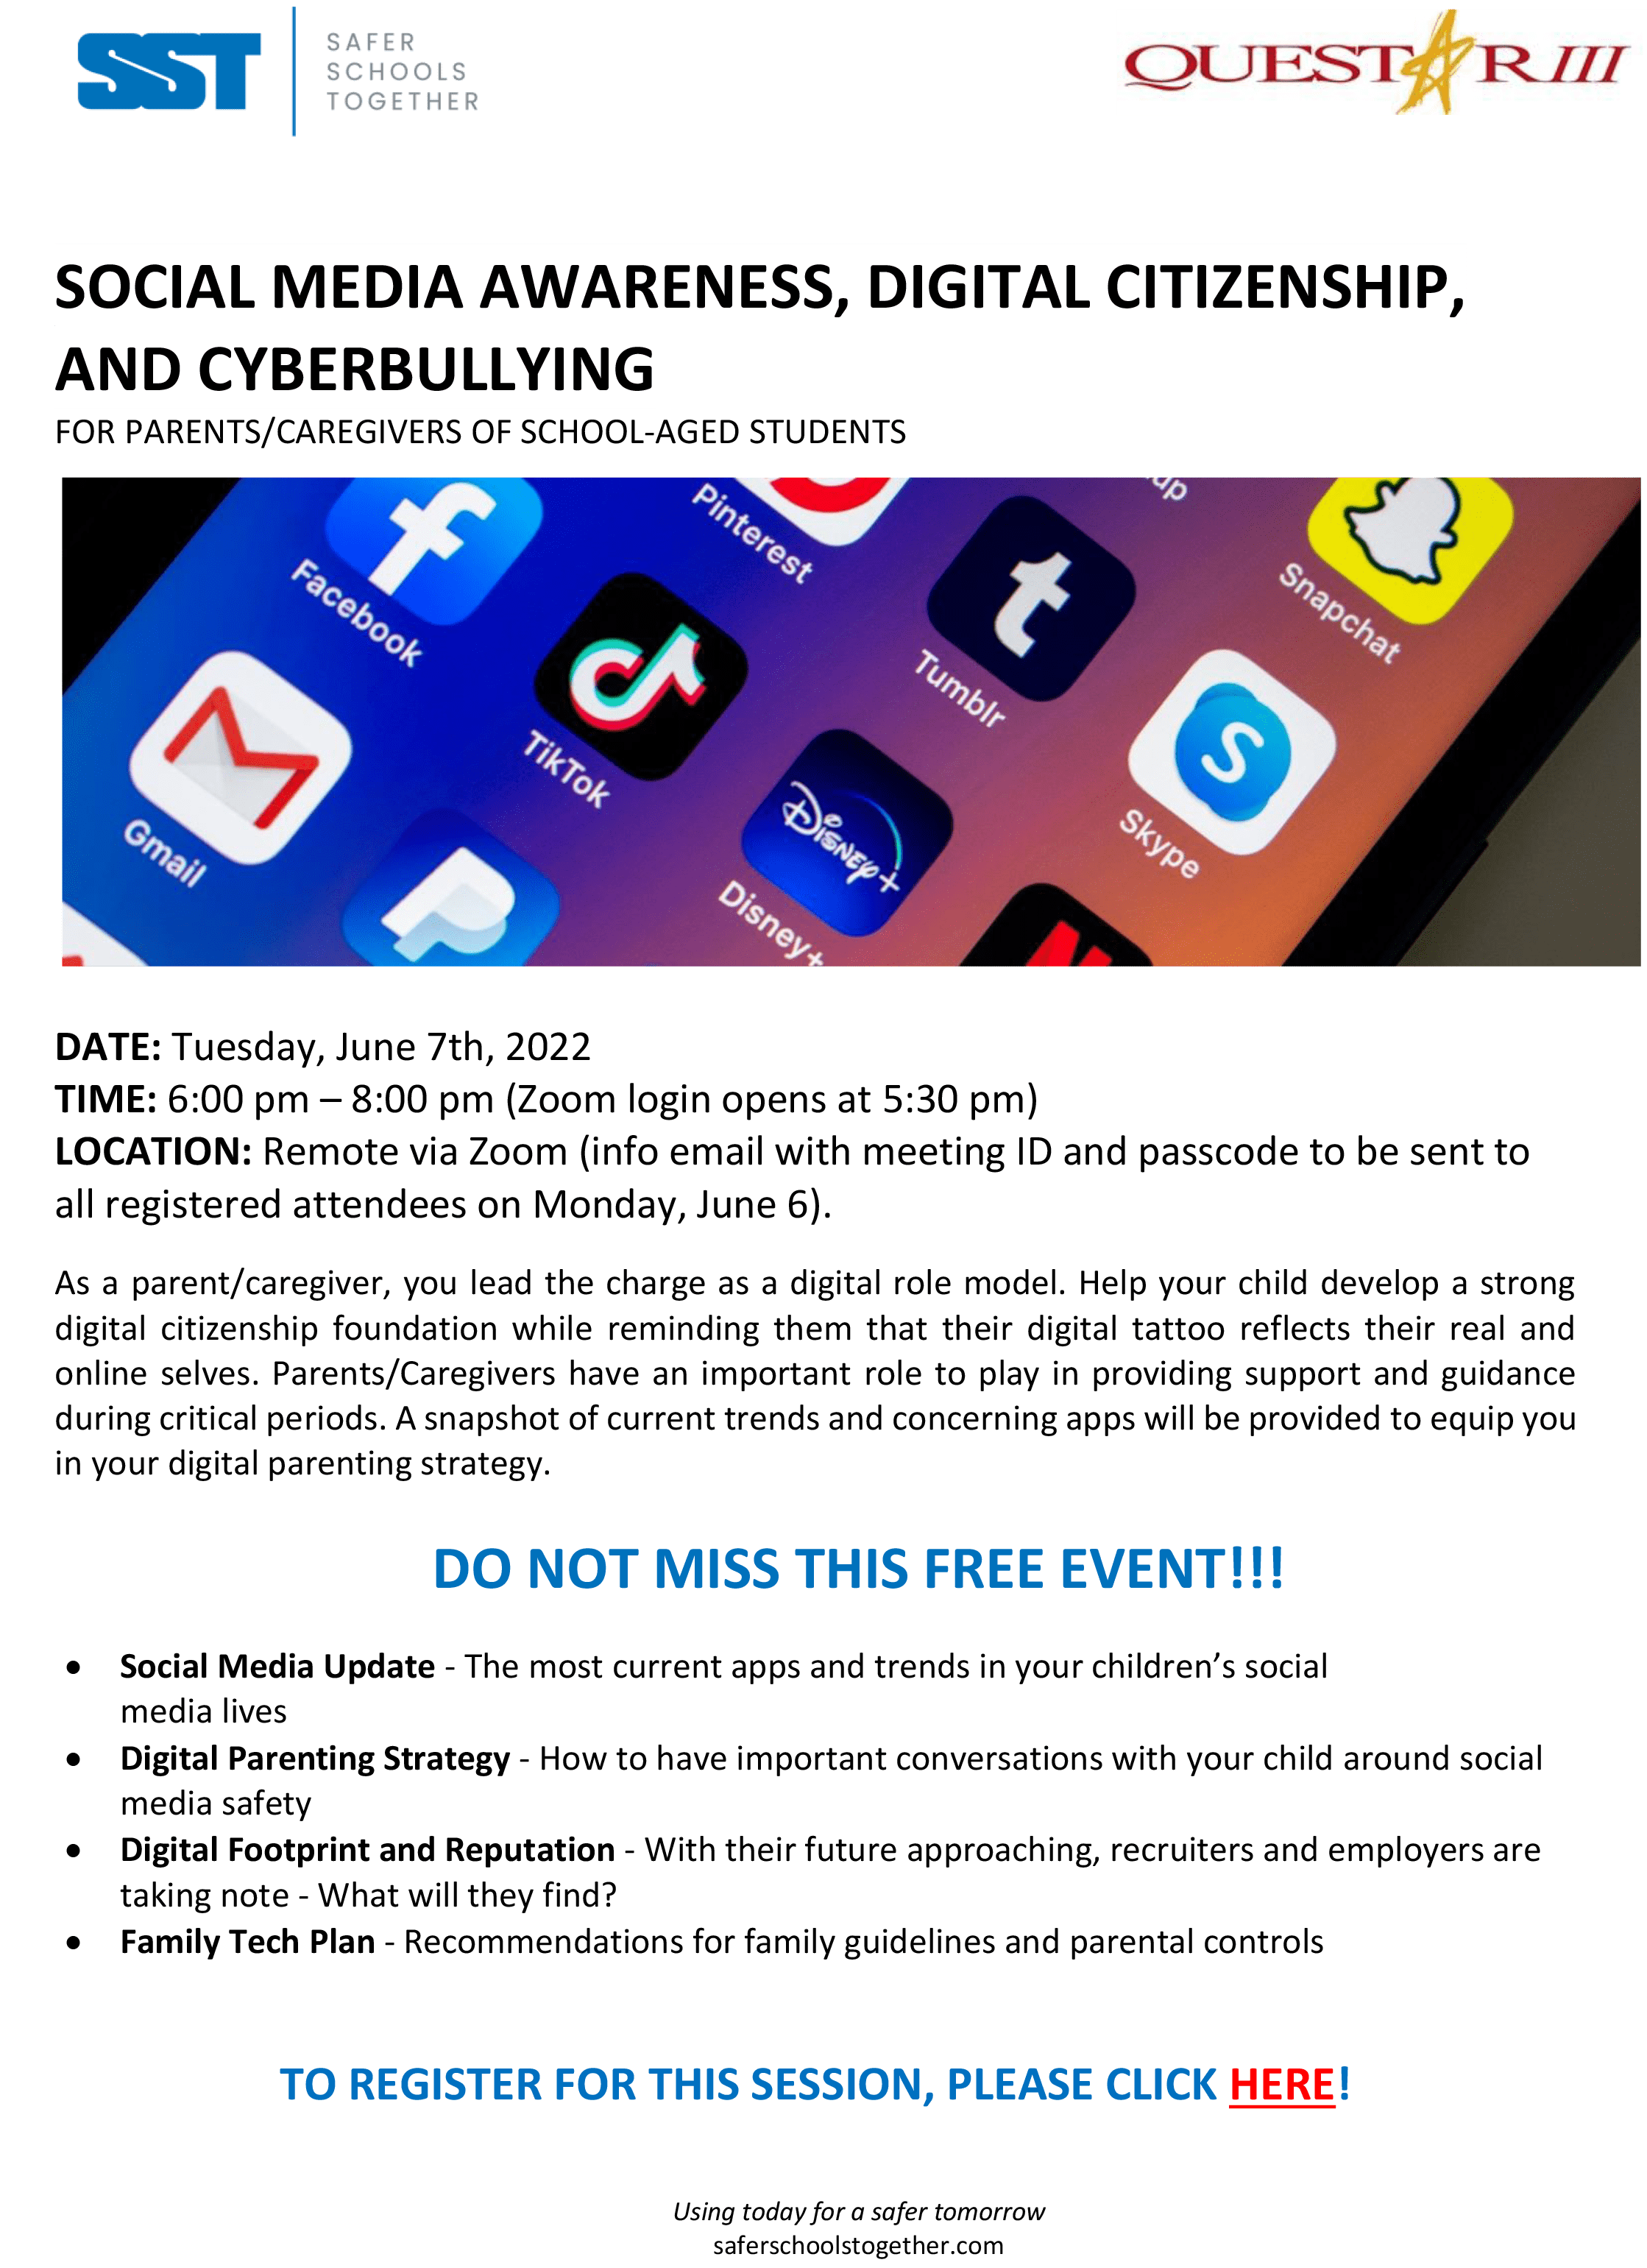 Flyer showing cellphone with social media apps